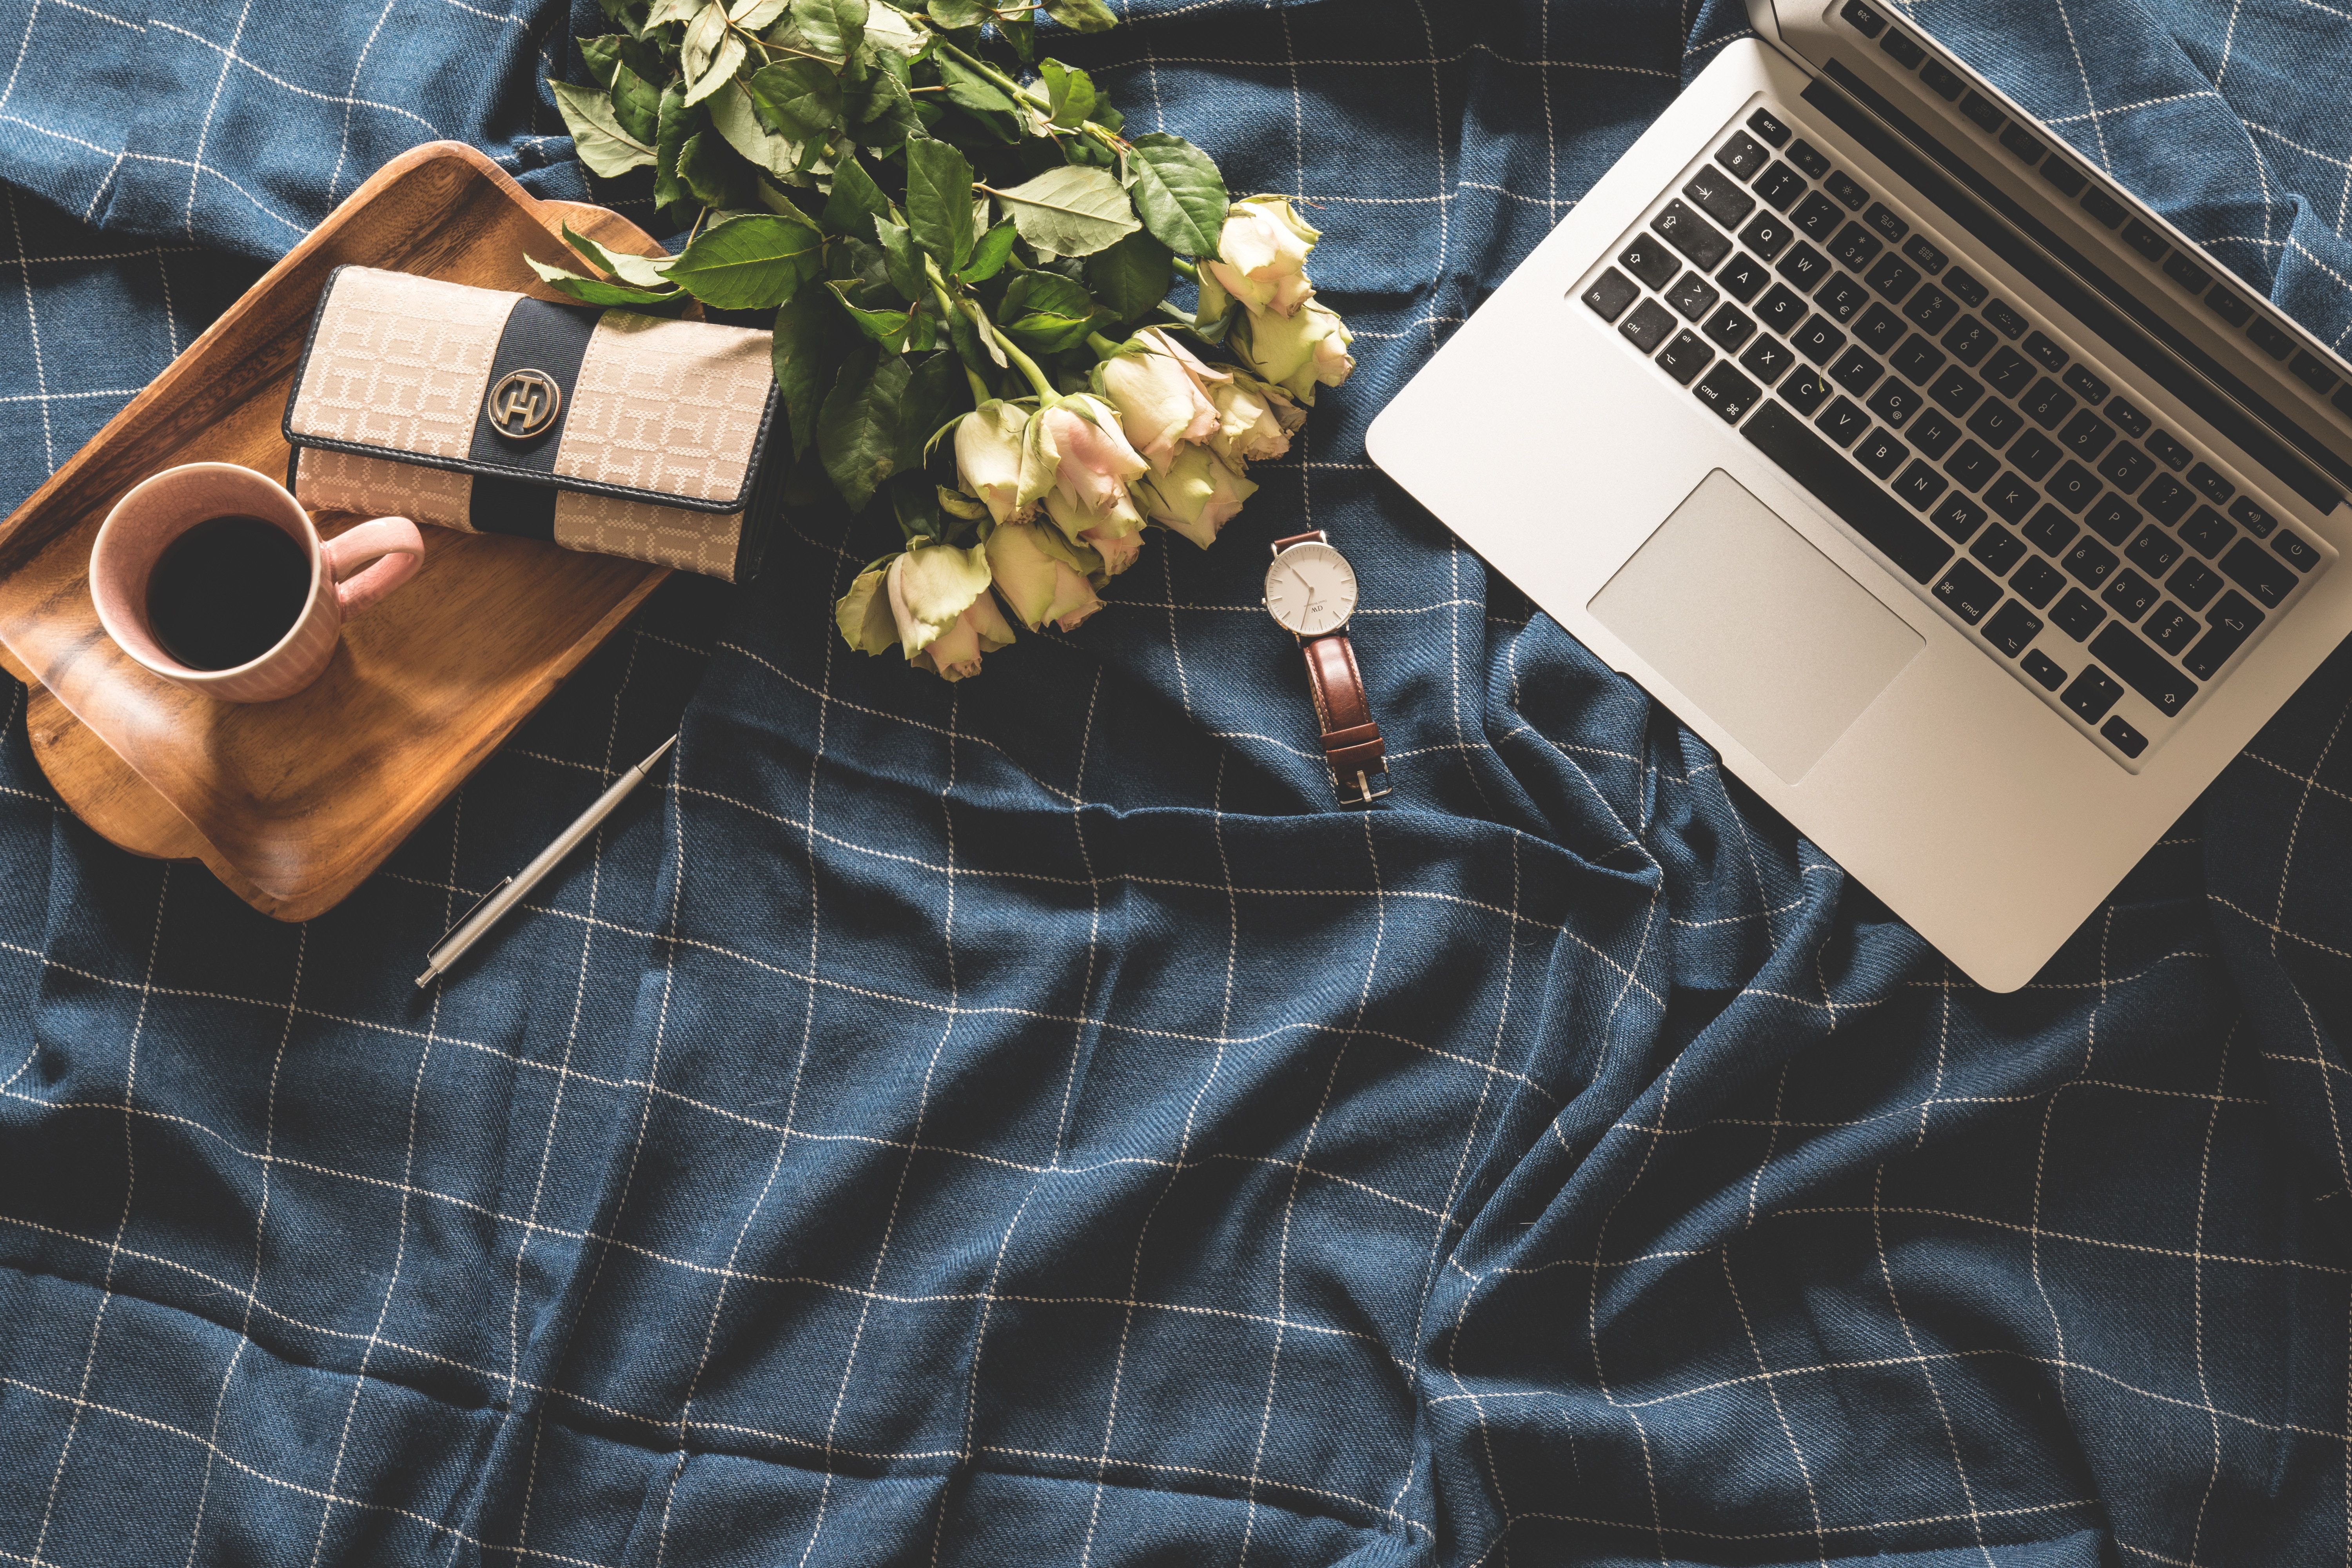 A laptop, a cup of coffee, a watch, a book, a pencil, and a bouquet of roses are placed on a bed. - Study